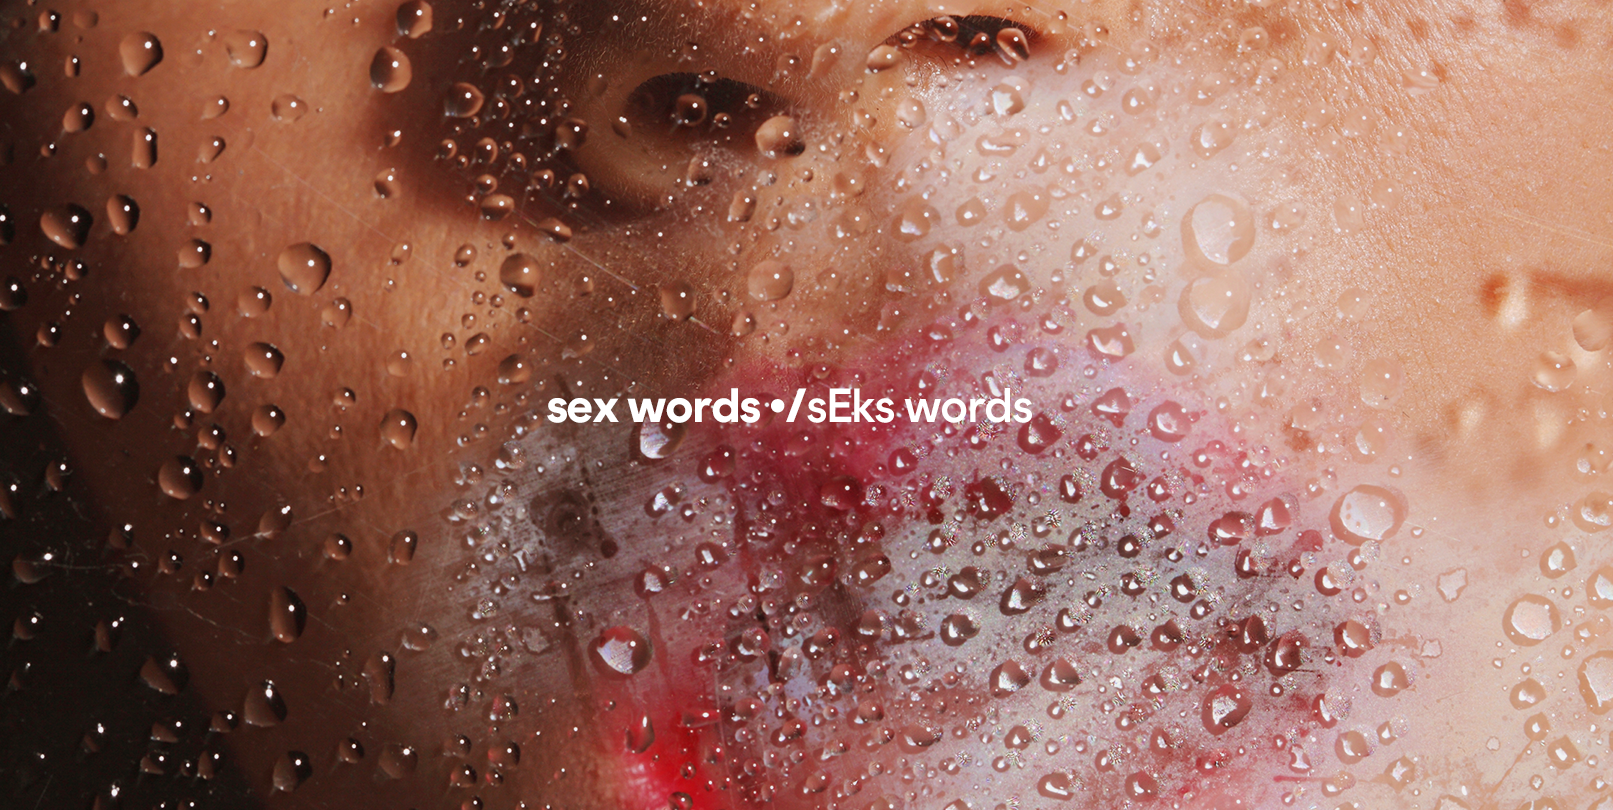 S Ex Y G I R L Ne K Et Ph Oto - 111 Sex Words to Know - Sex Slang Glossary and Lingo Definitions